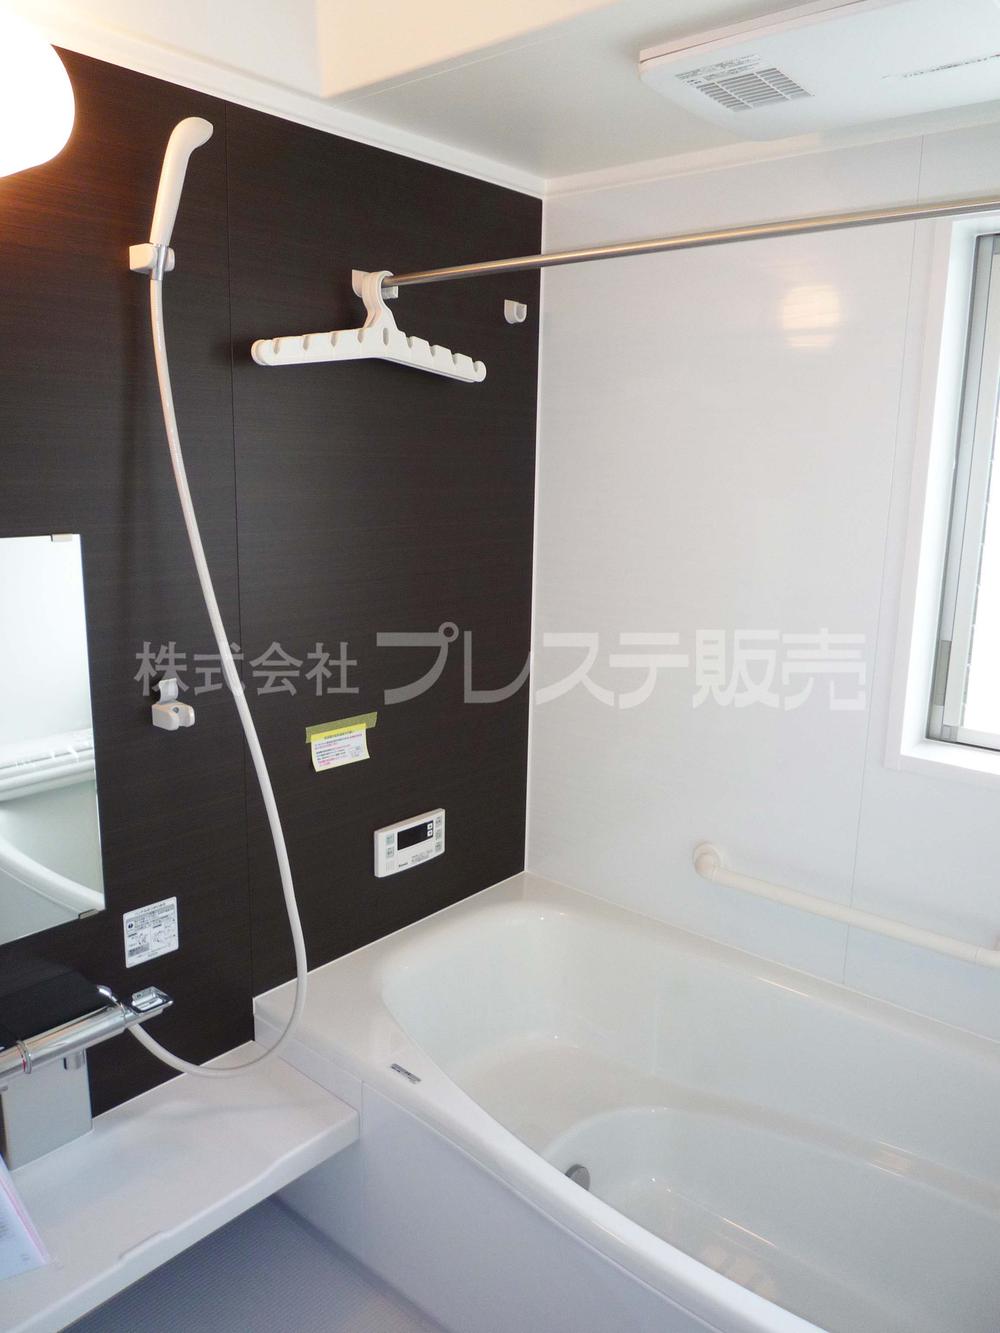 Same specifications photo (bathroom). Standard equipped with a bathroom heating dryer! 